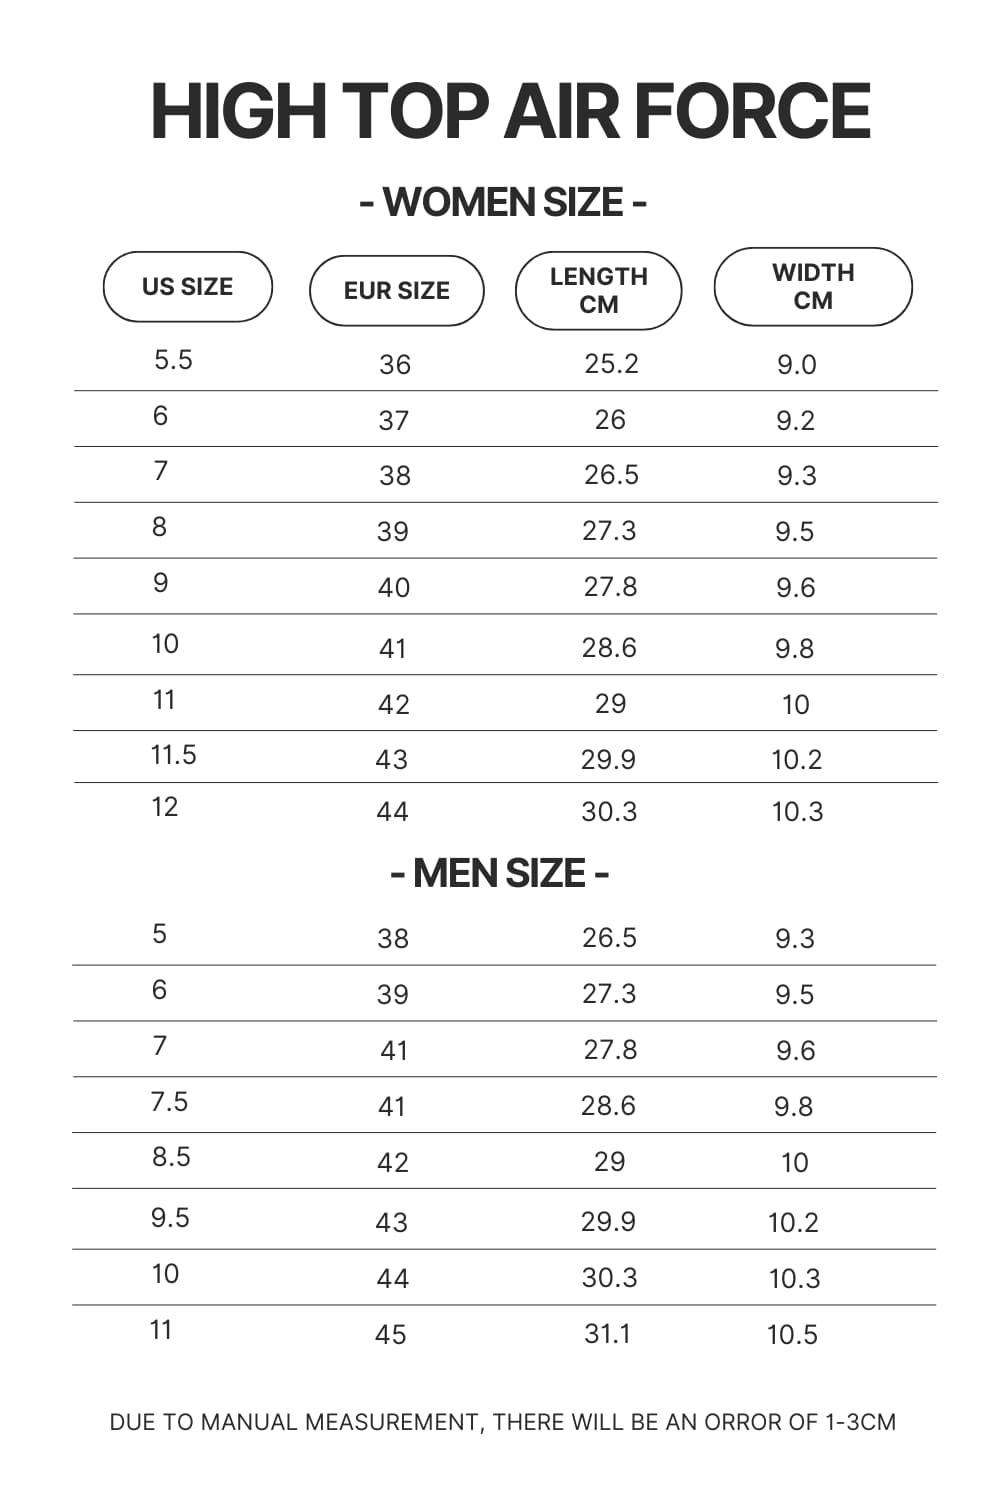 High Top Air Force Shoes Size Chart - Demon Slayer Shoes